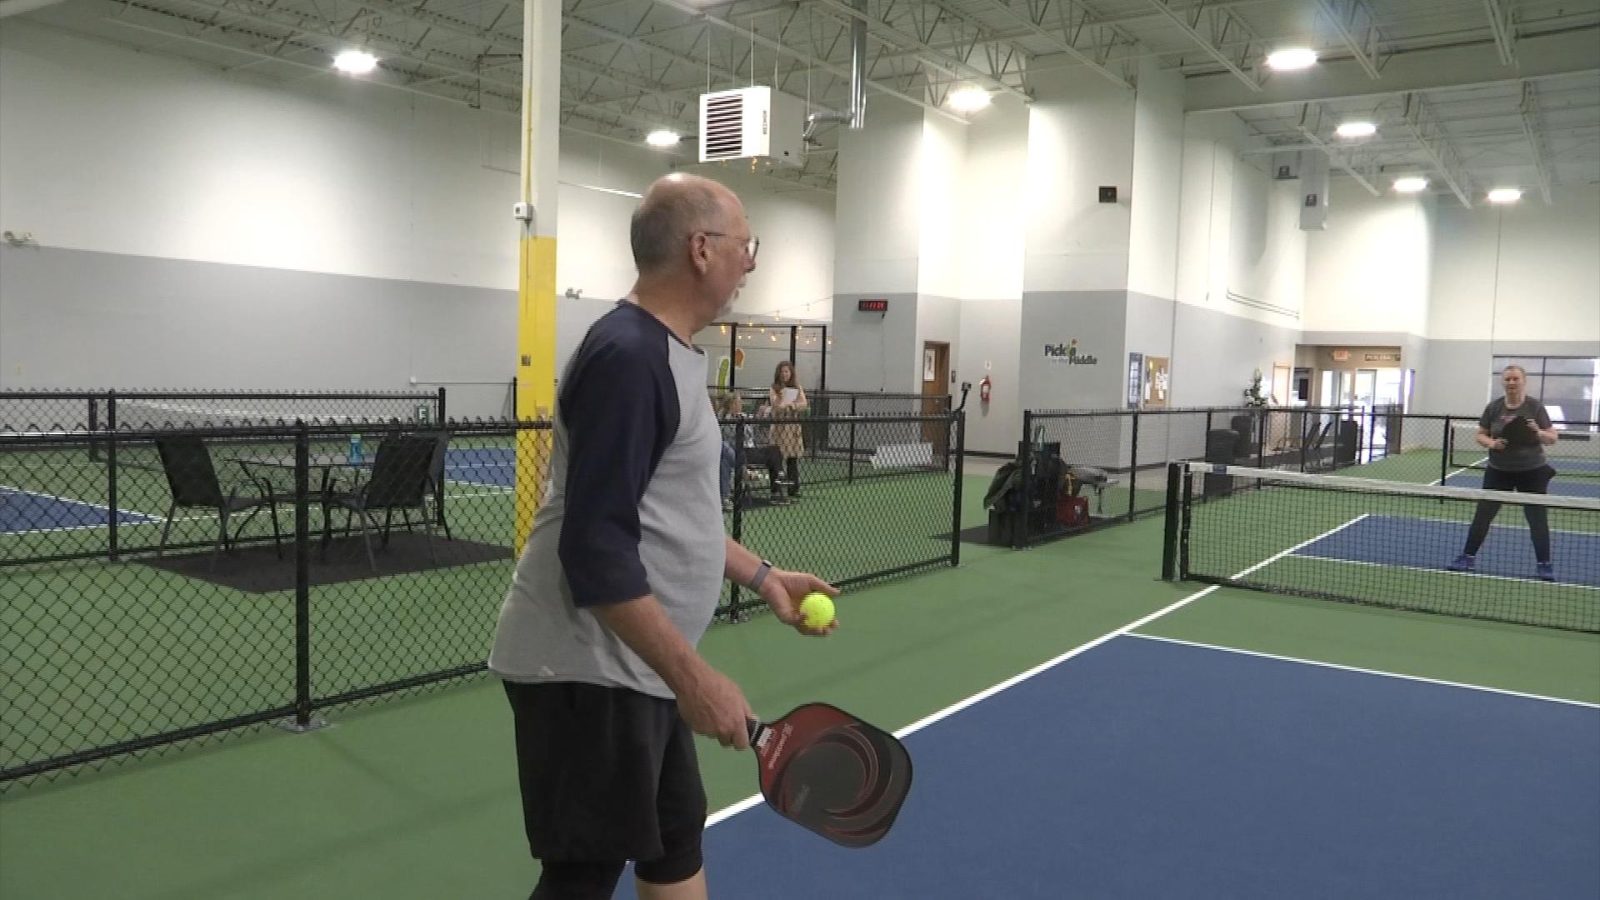 USA Pickleball Association Ambassador Steve Parobok playing at the Pickle in the Middle location in Brooklyn Park.